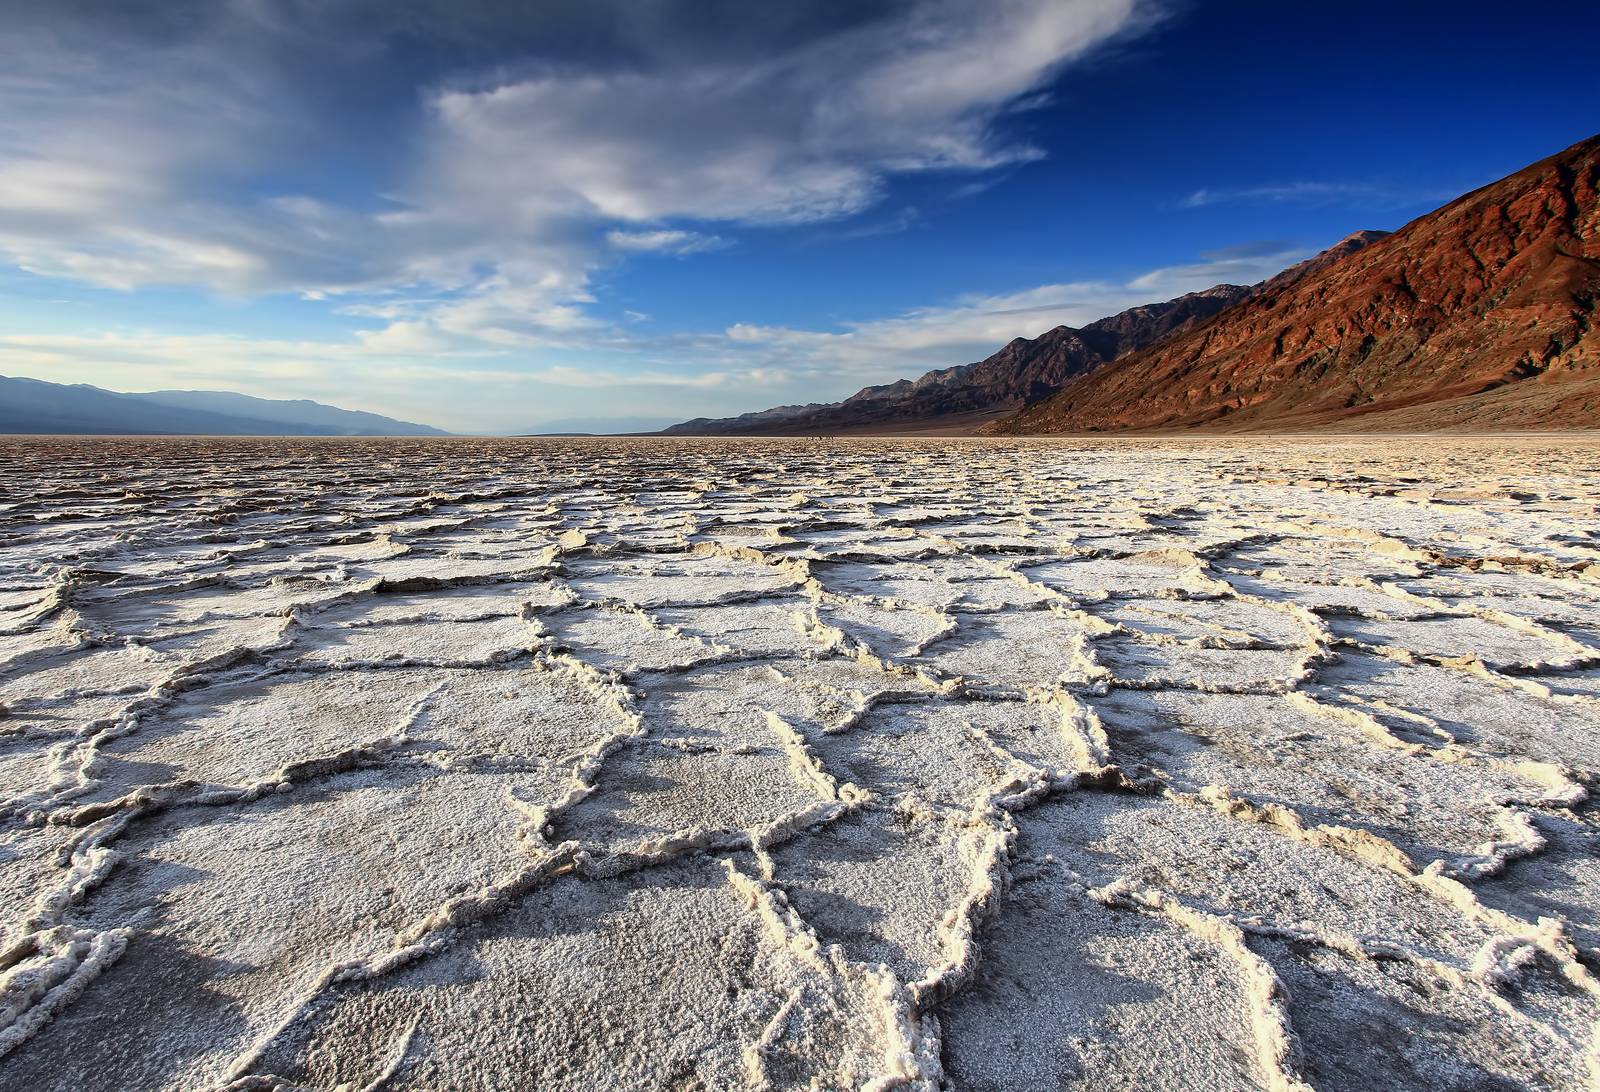 The Badwater Salt Flats are located on the south end of Death Valley National Park.